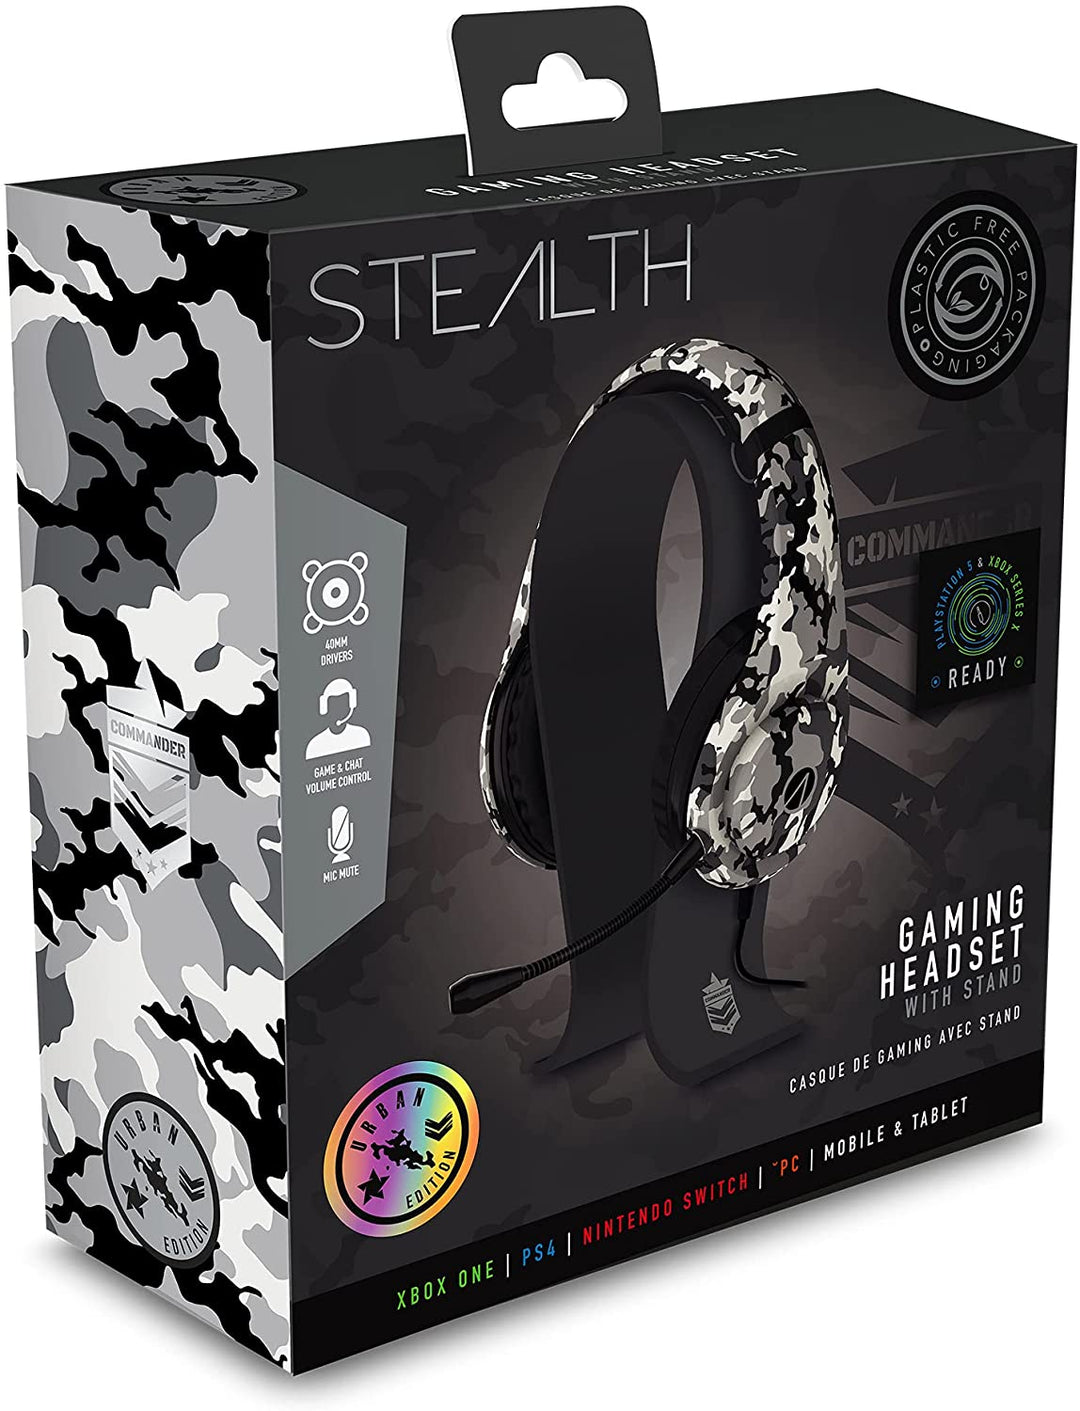 Stealth COMMANDER Gaming Headset with Stand for XBOX, PS4/PS5, Switch, PC - URBAN Edition (PS4)